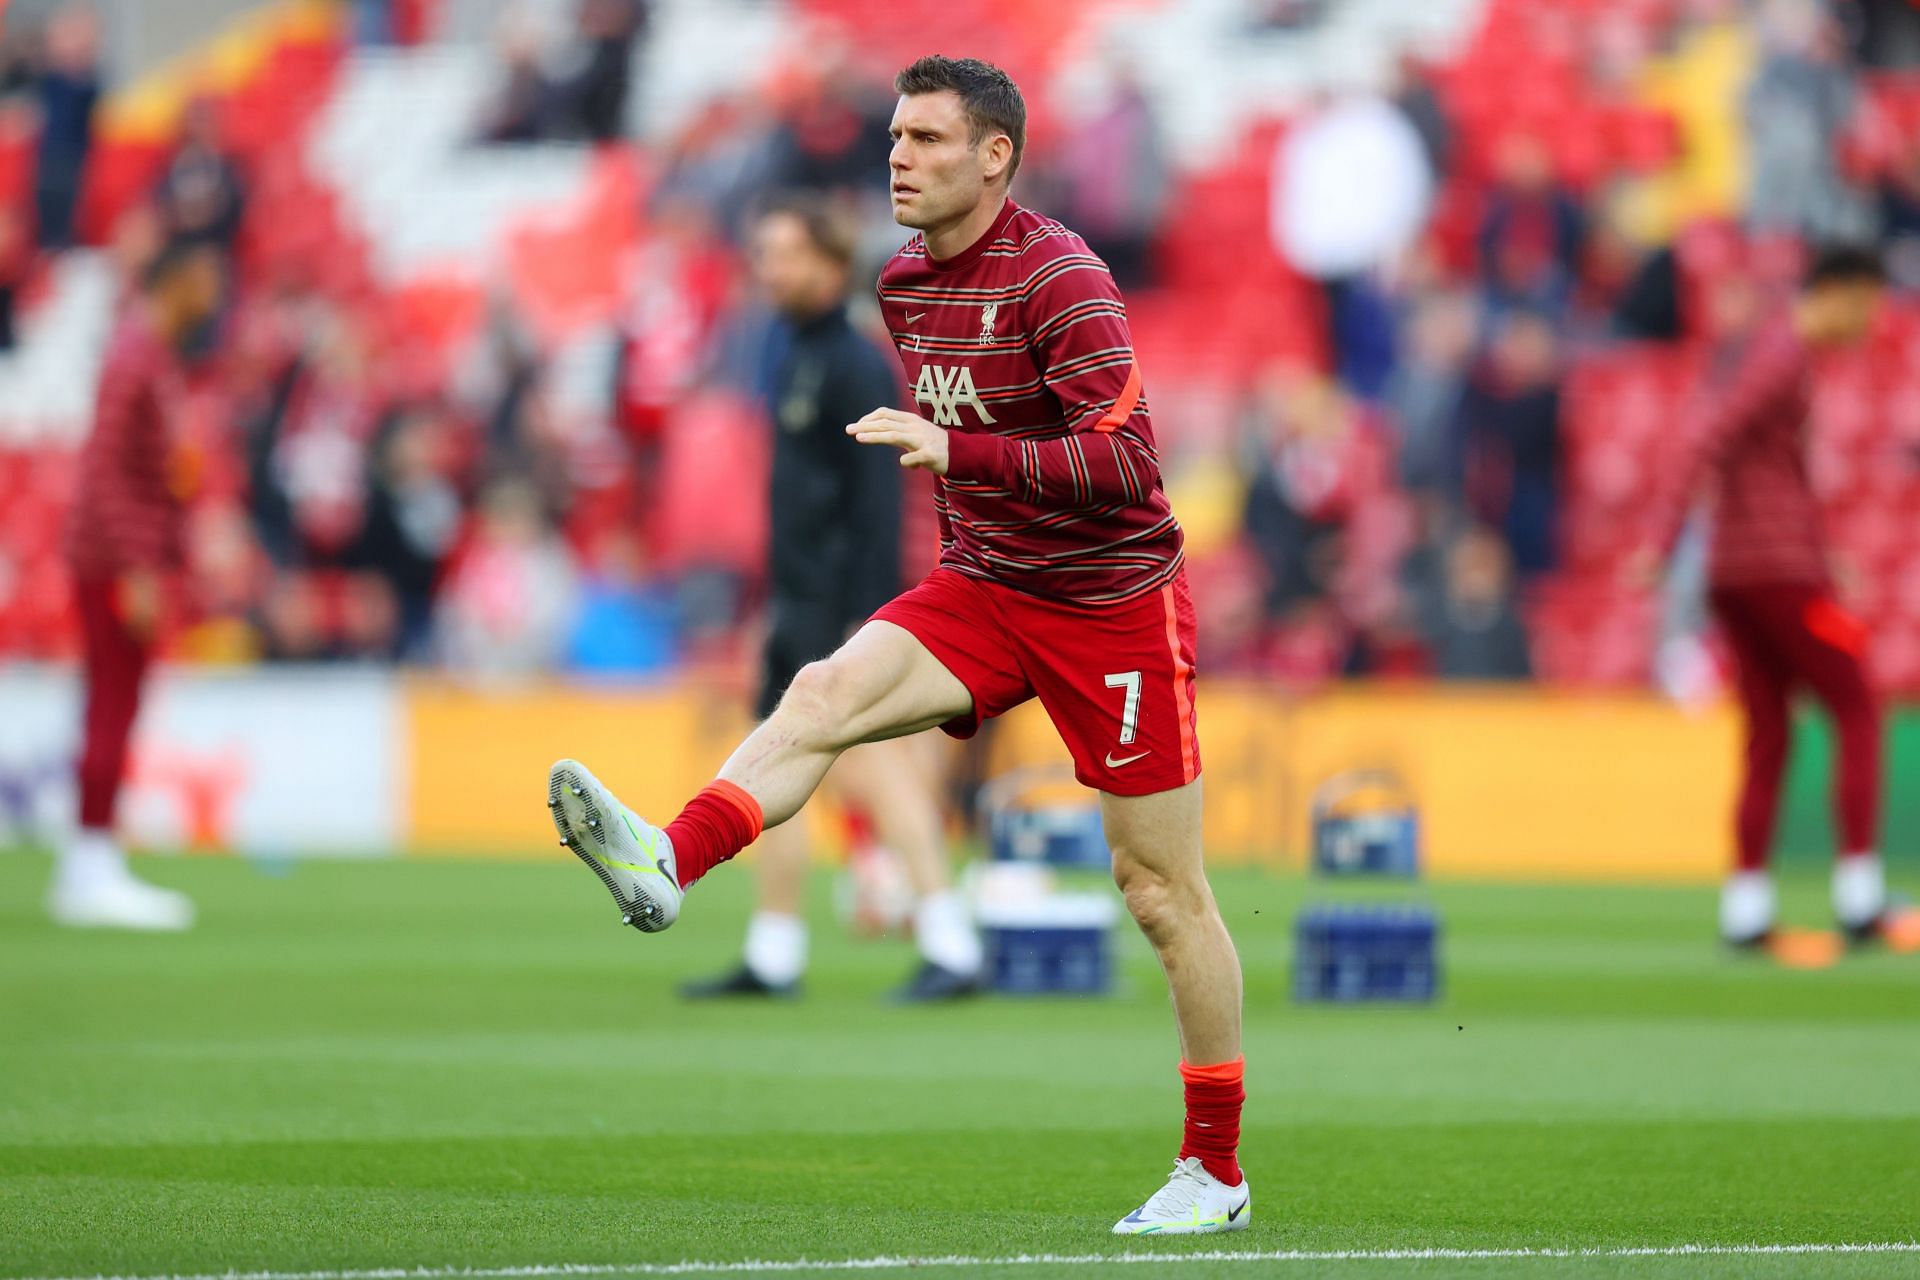 James Milner has been a consistent performer for Liverpool